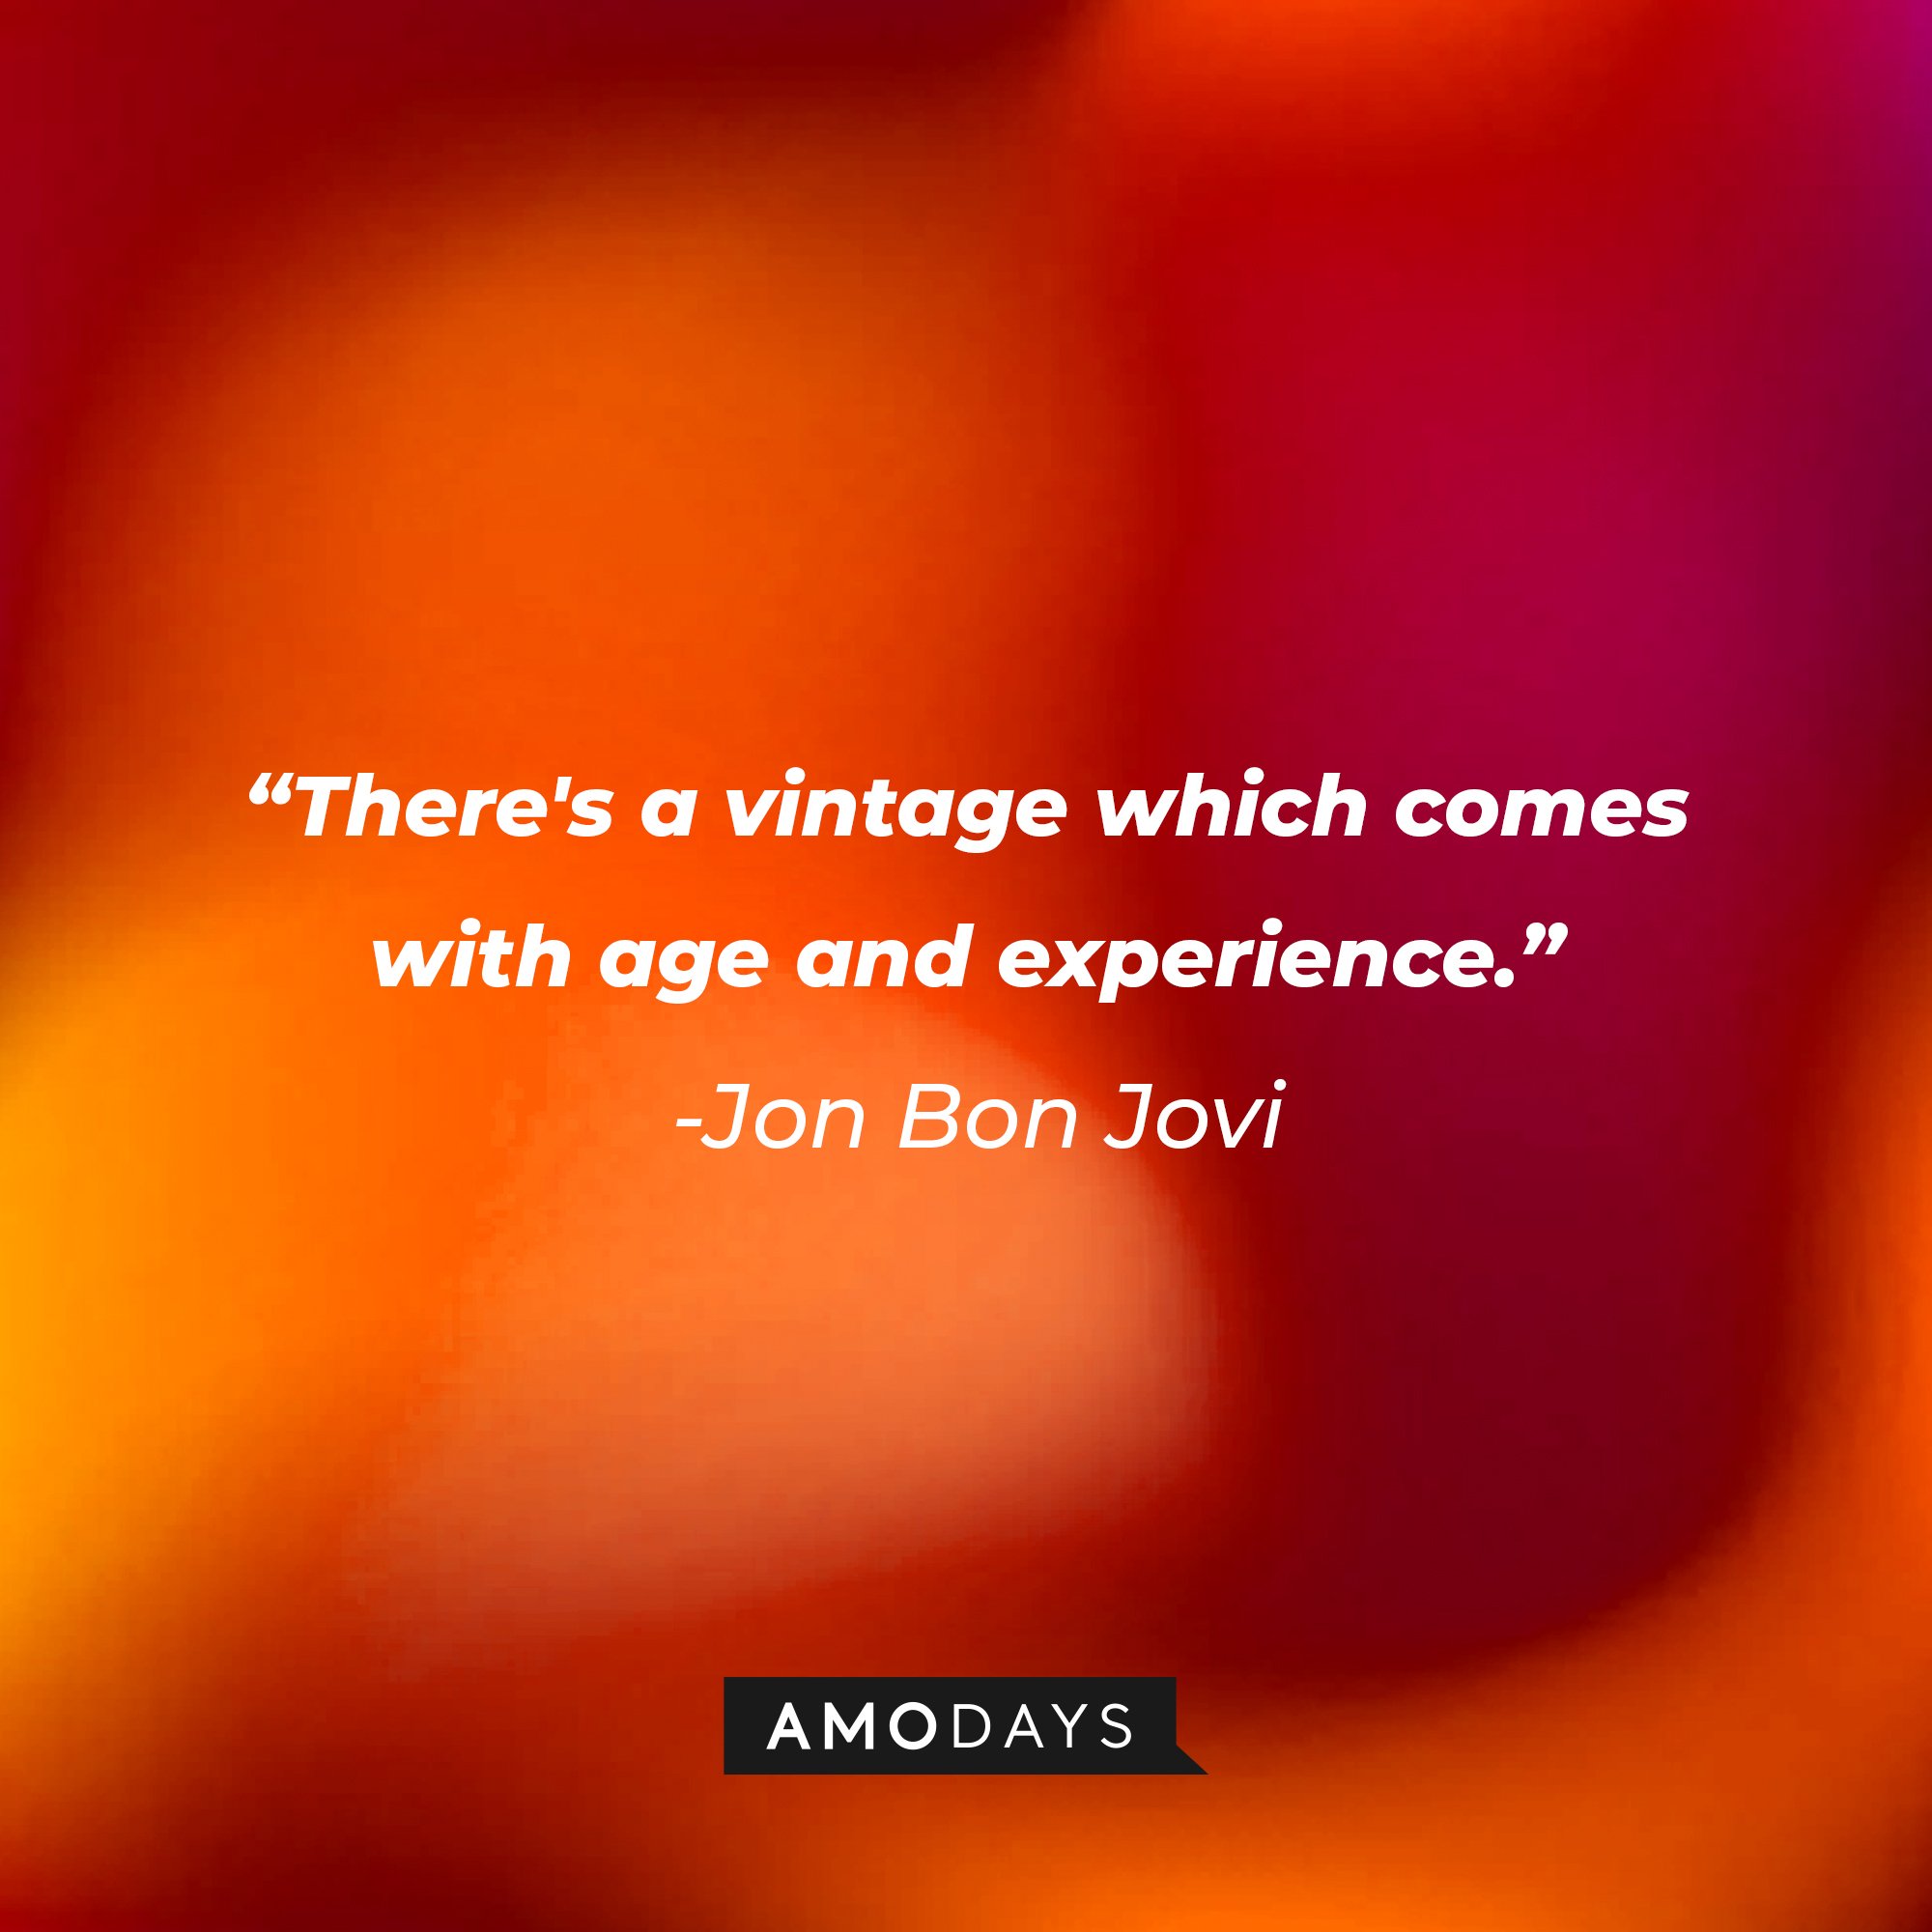 Jon Bon Jovi’s quote: "There's a vintage which comes with age and experience." | Image: AmoDays